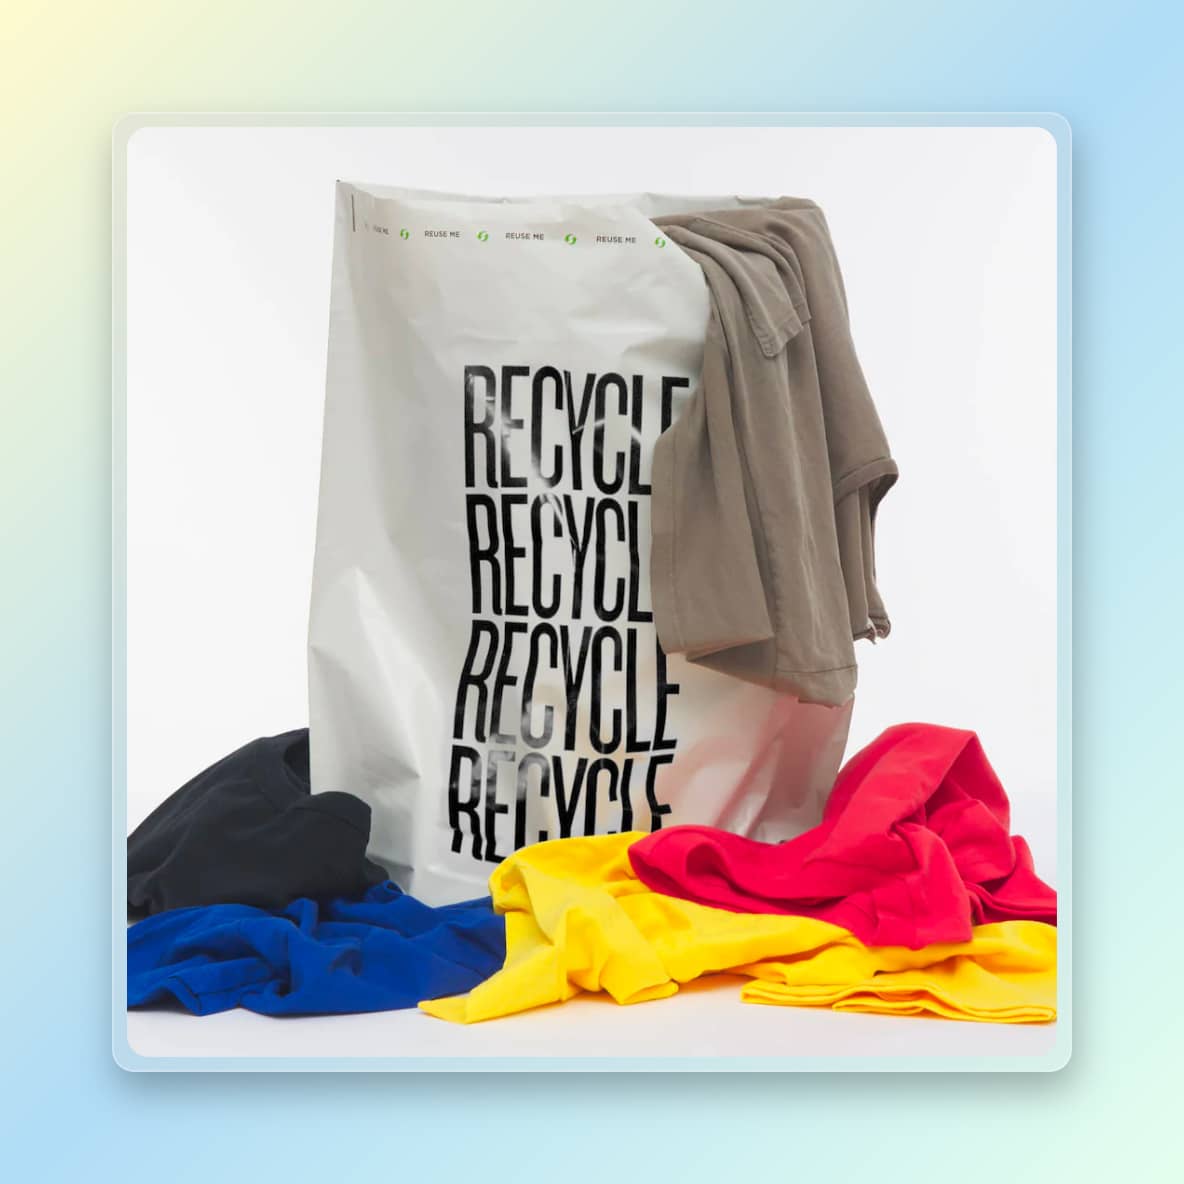 Bag for recycling clothing